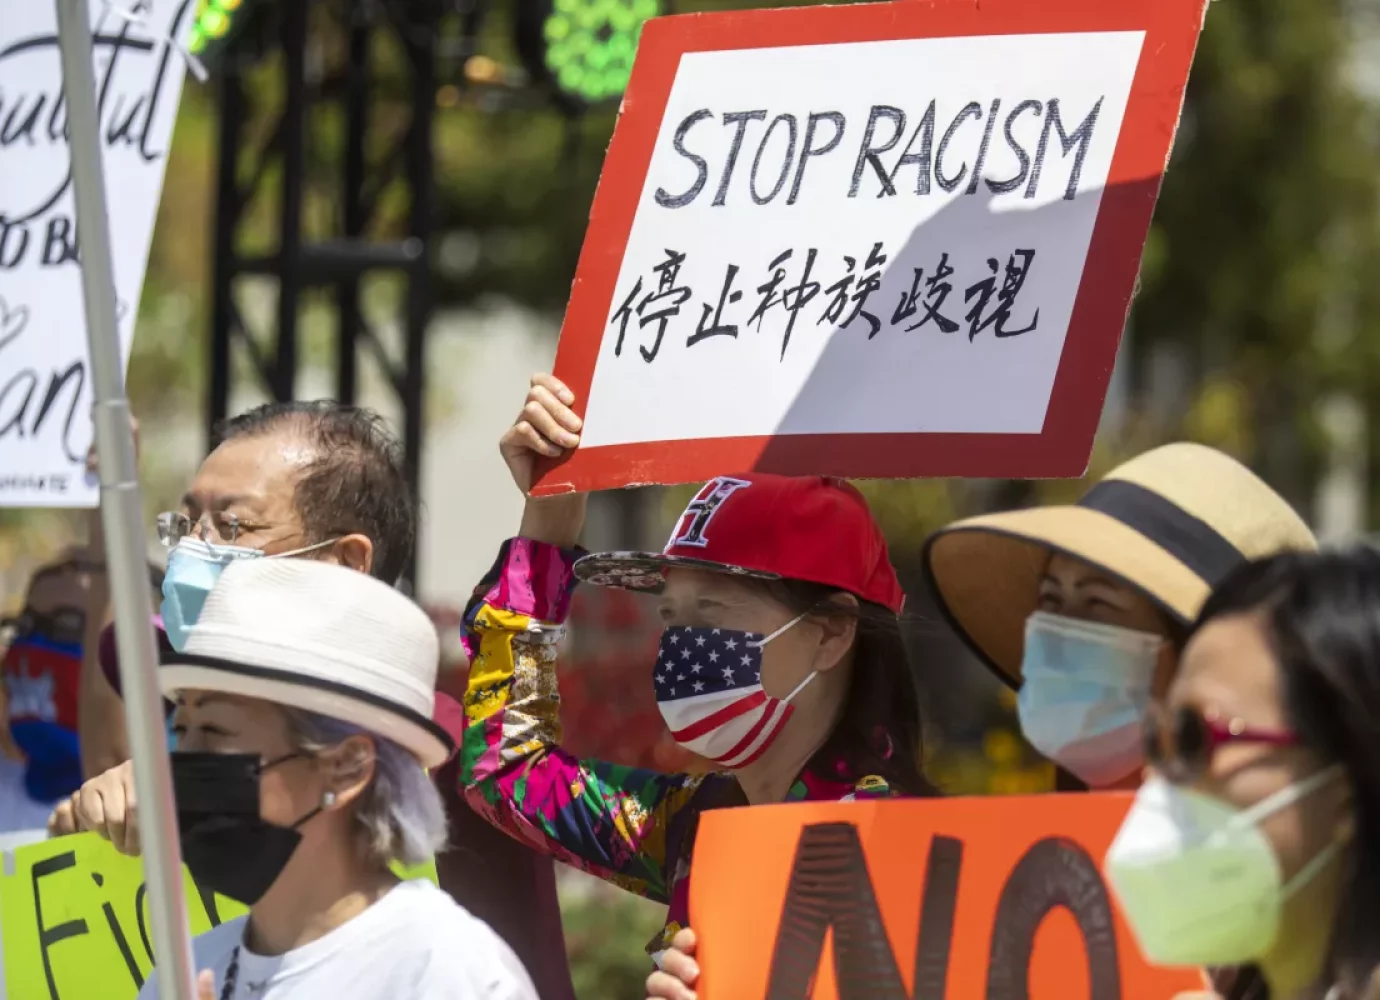 Linda Shen, center, of Alhambra participates in a demonstration in Los Angeles against anti-Asian violence on May 8, 2021. (Francine Orr / Los Angeles Times)